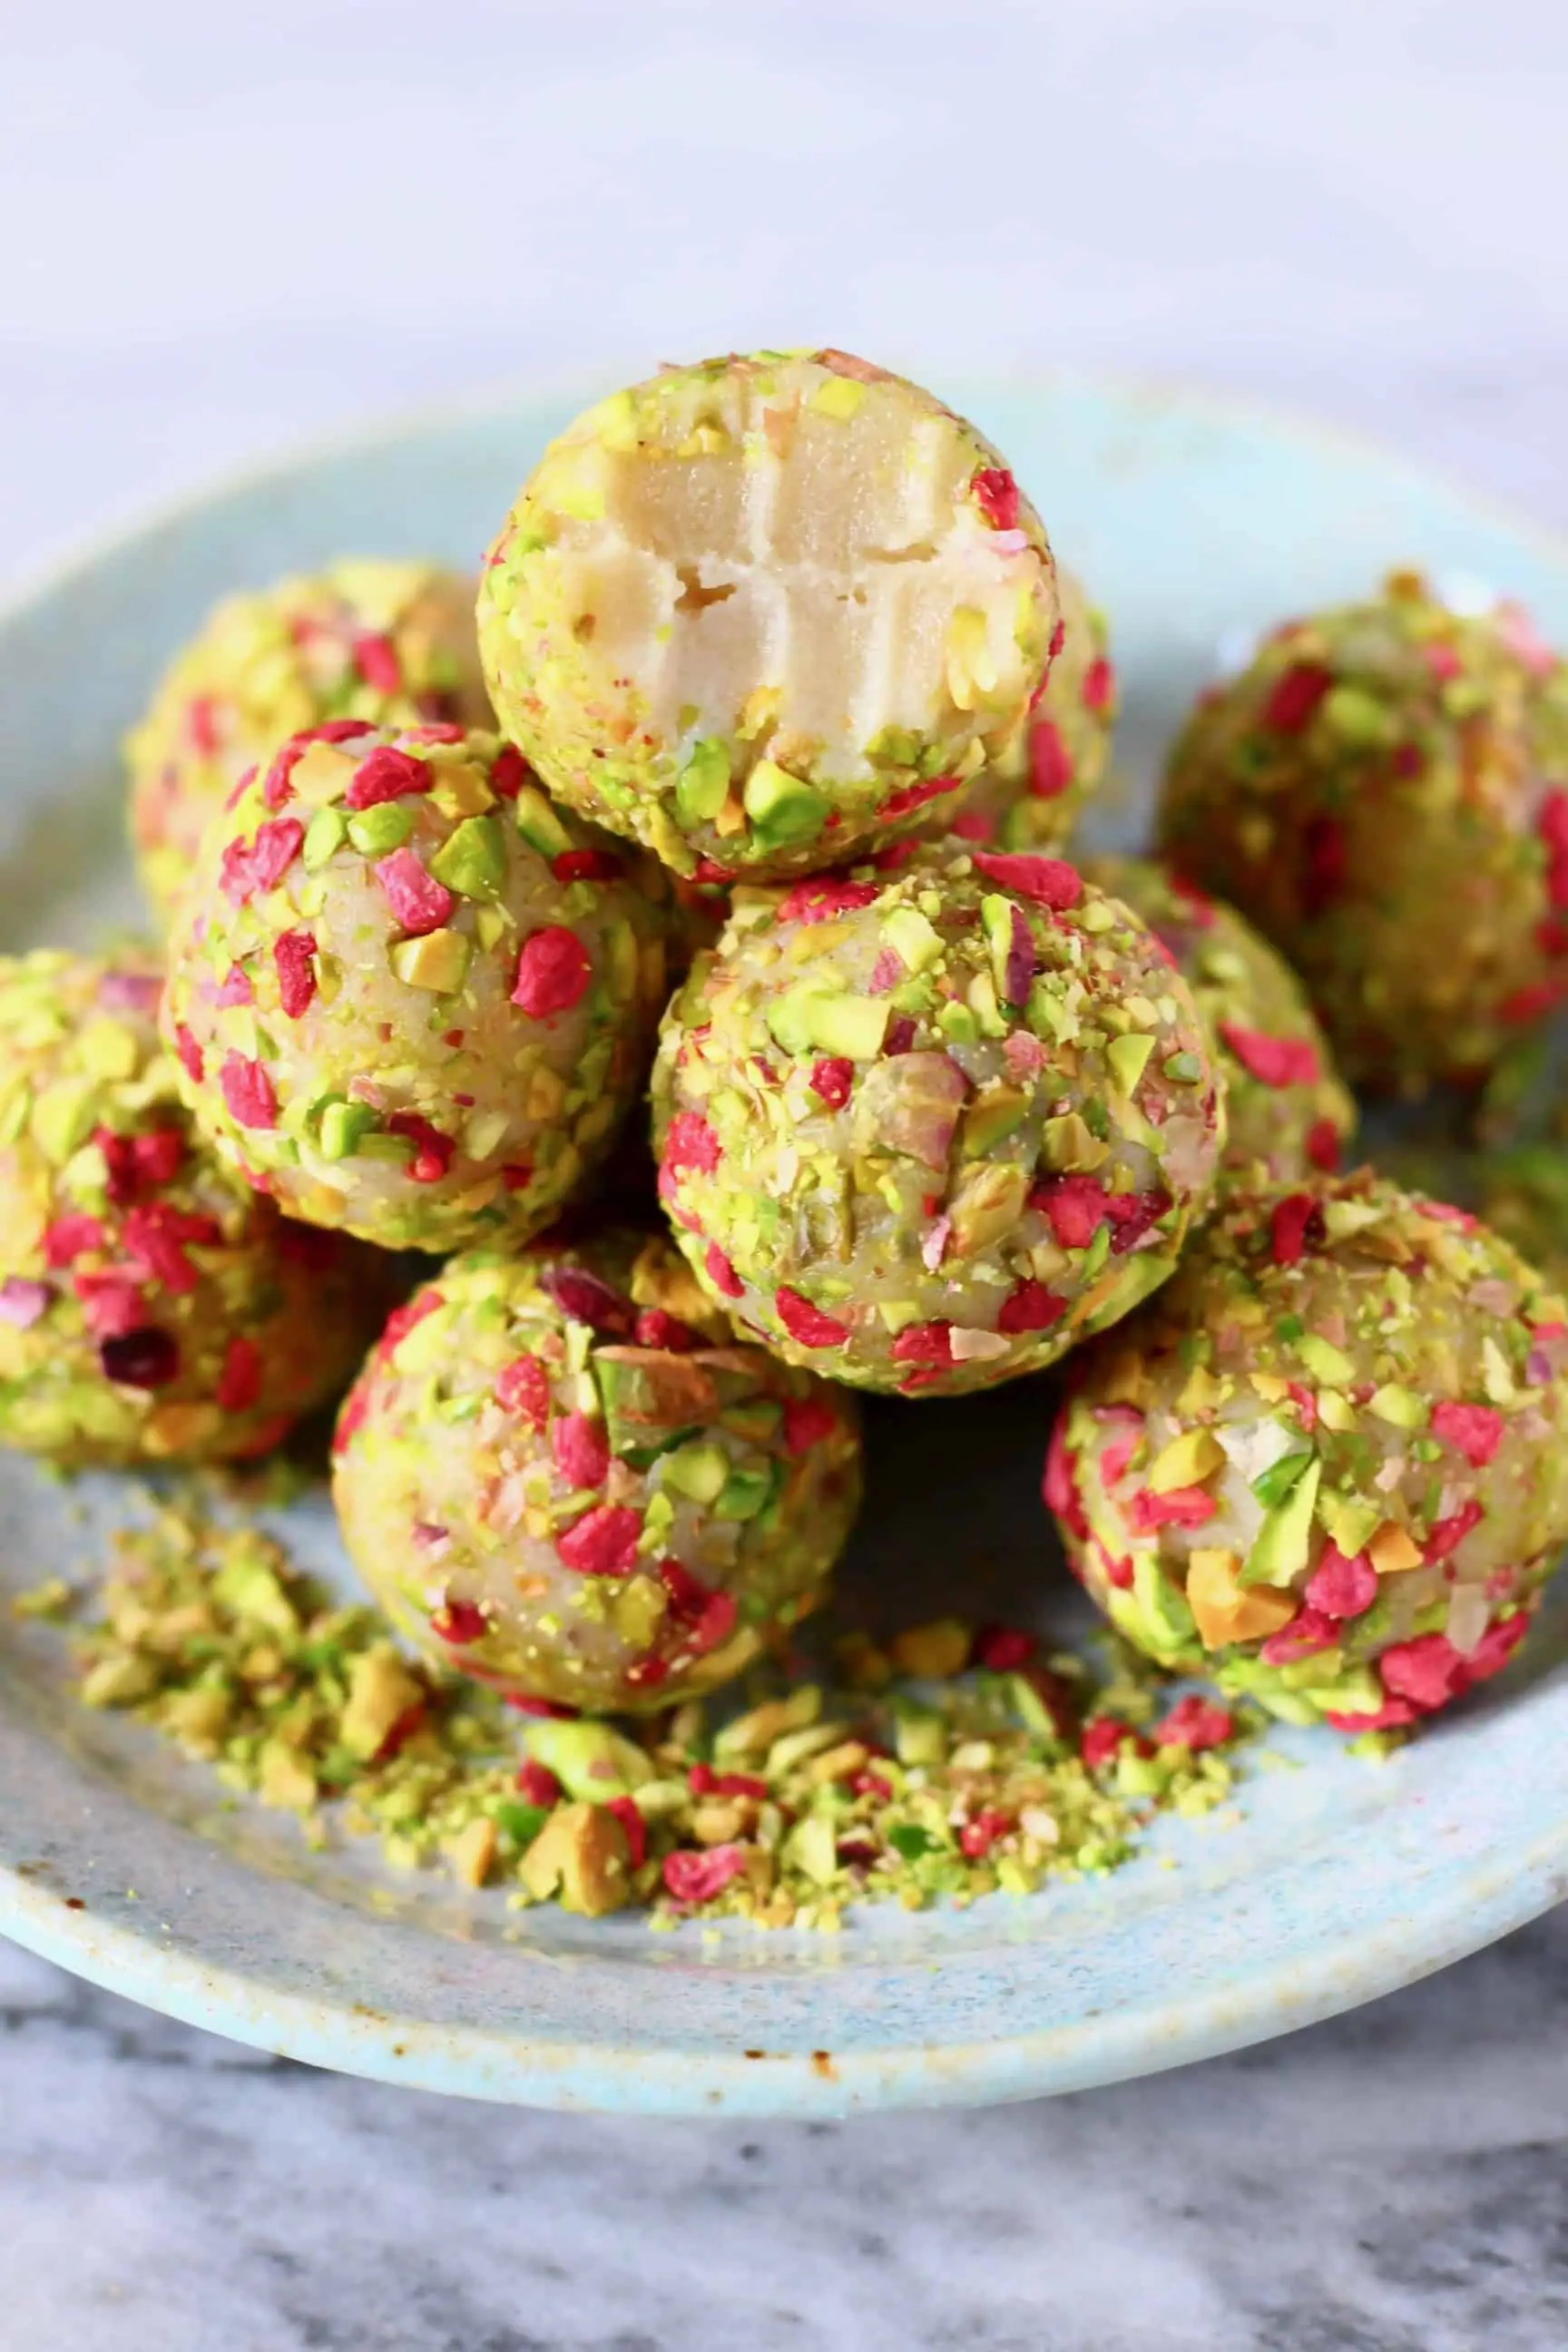 A pile of vegan white chocolate truffles covered in chopped pistachios and freeze-dried raspberries with a bitten one on top